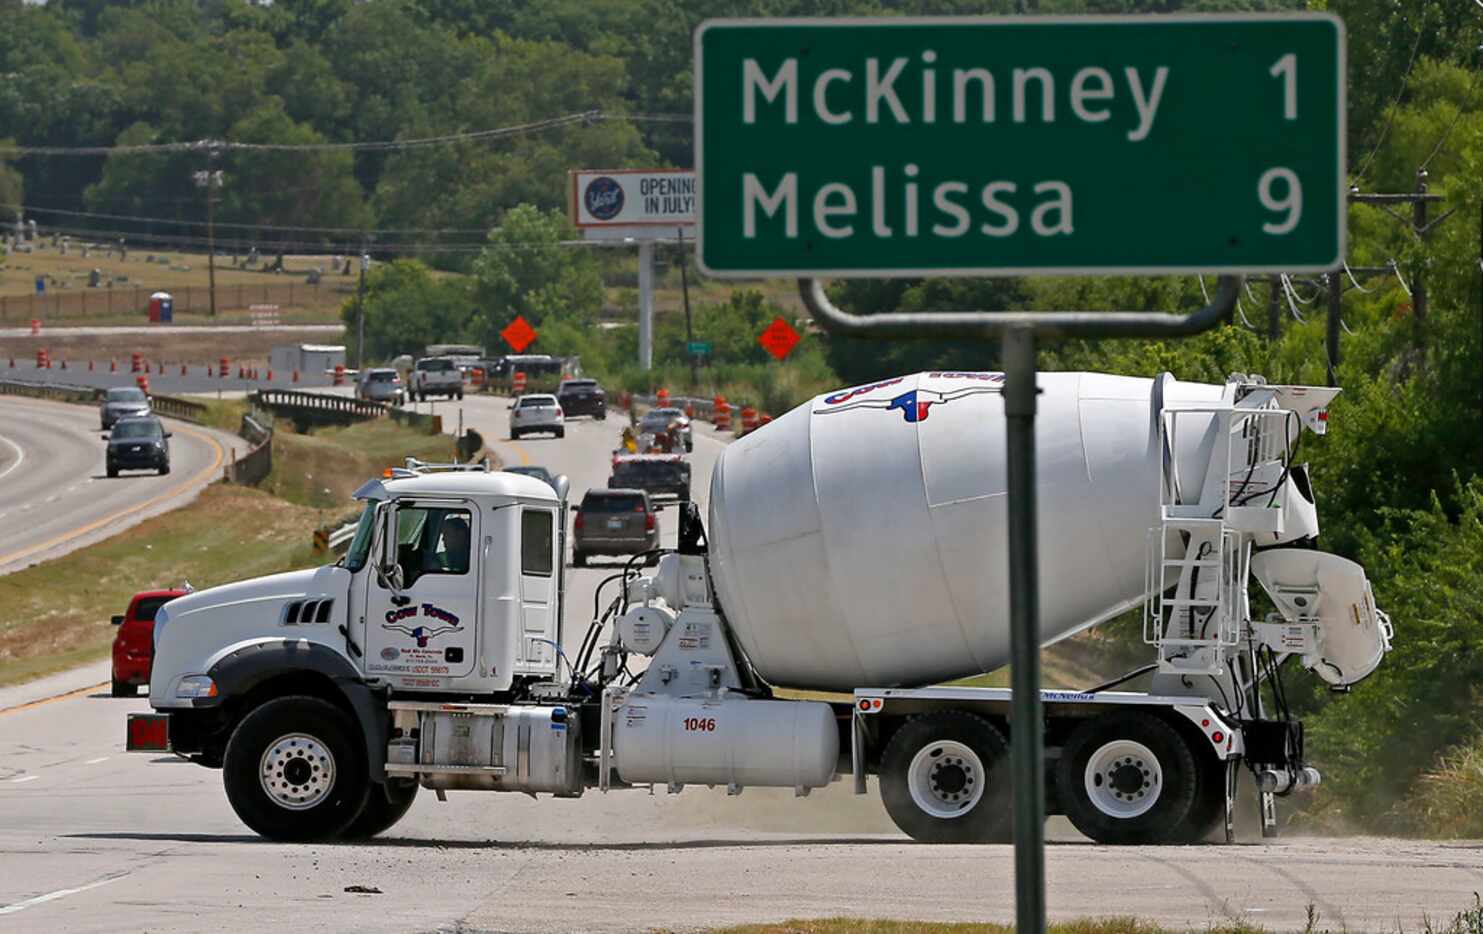 Concrete plants are fairly common in booming cities like McKinney that have a high demand...